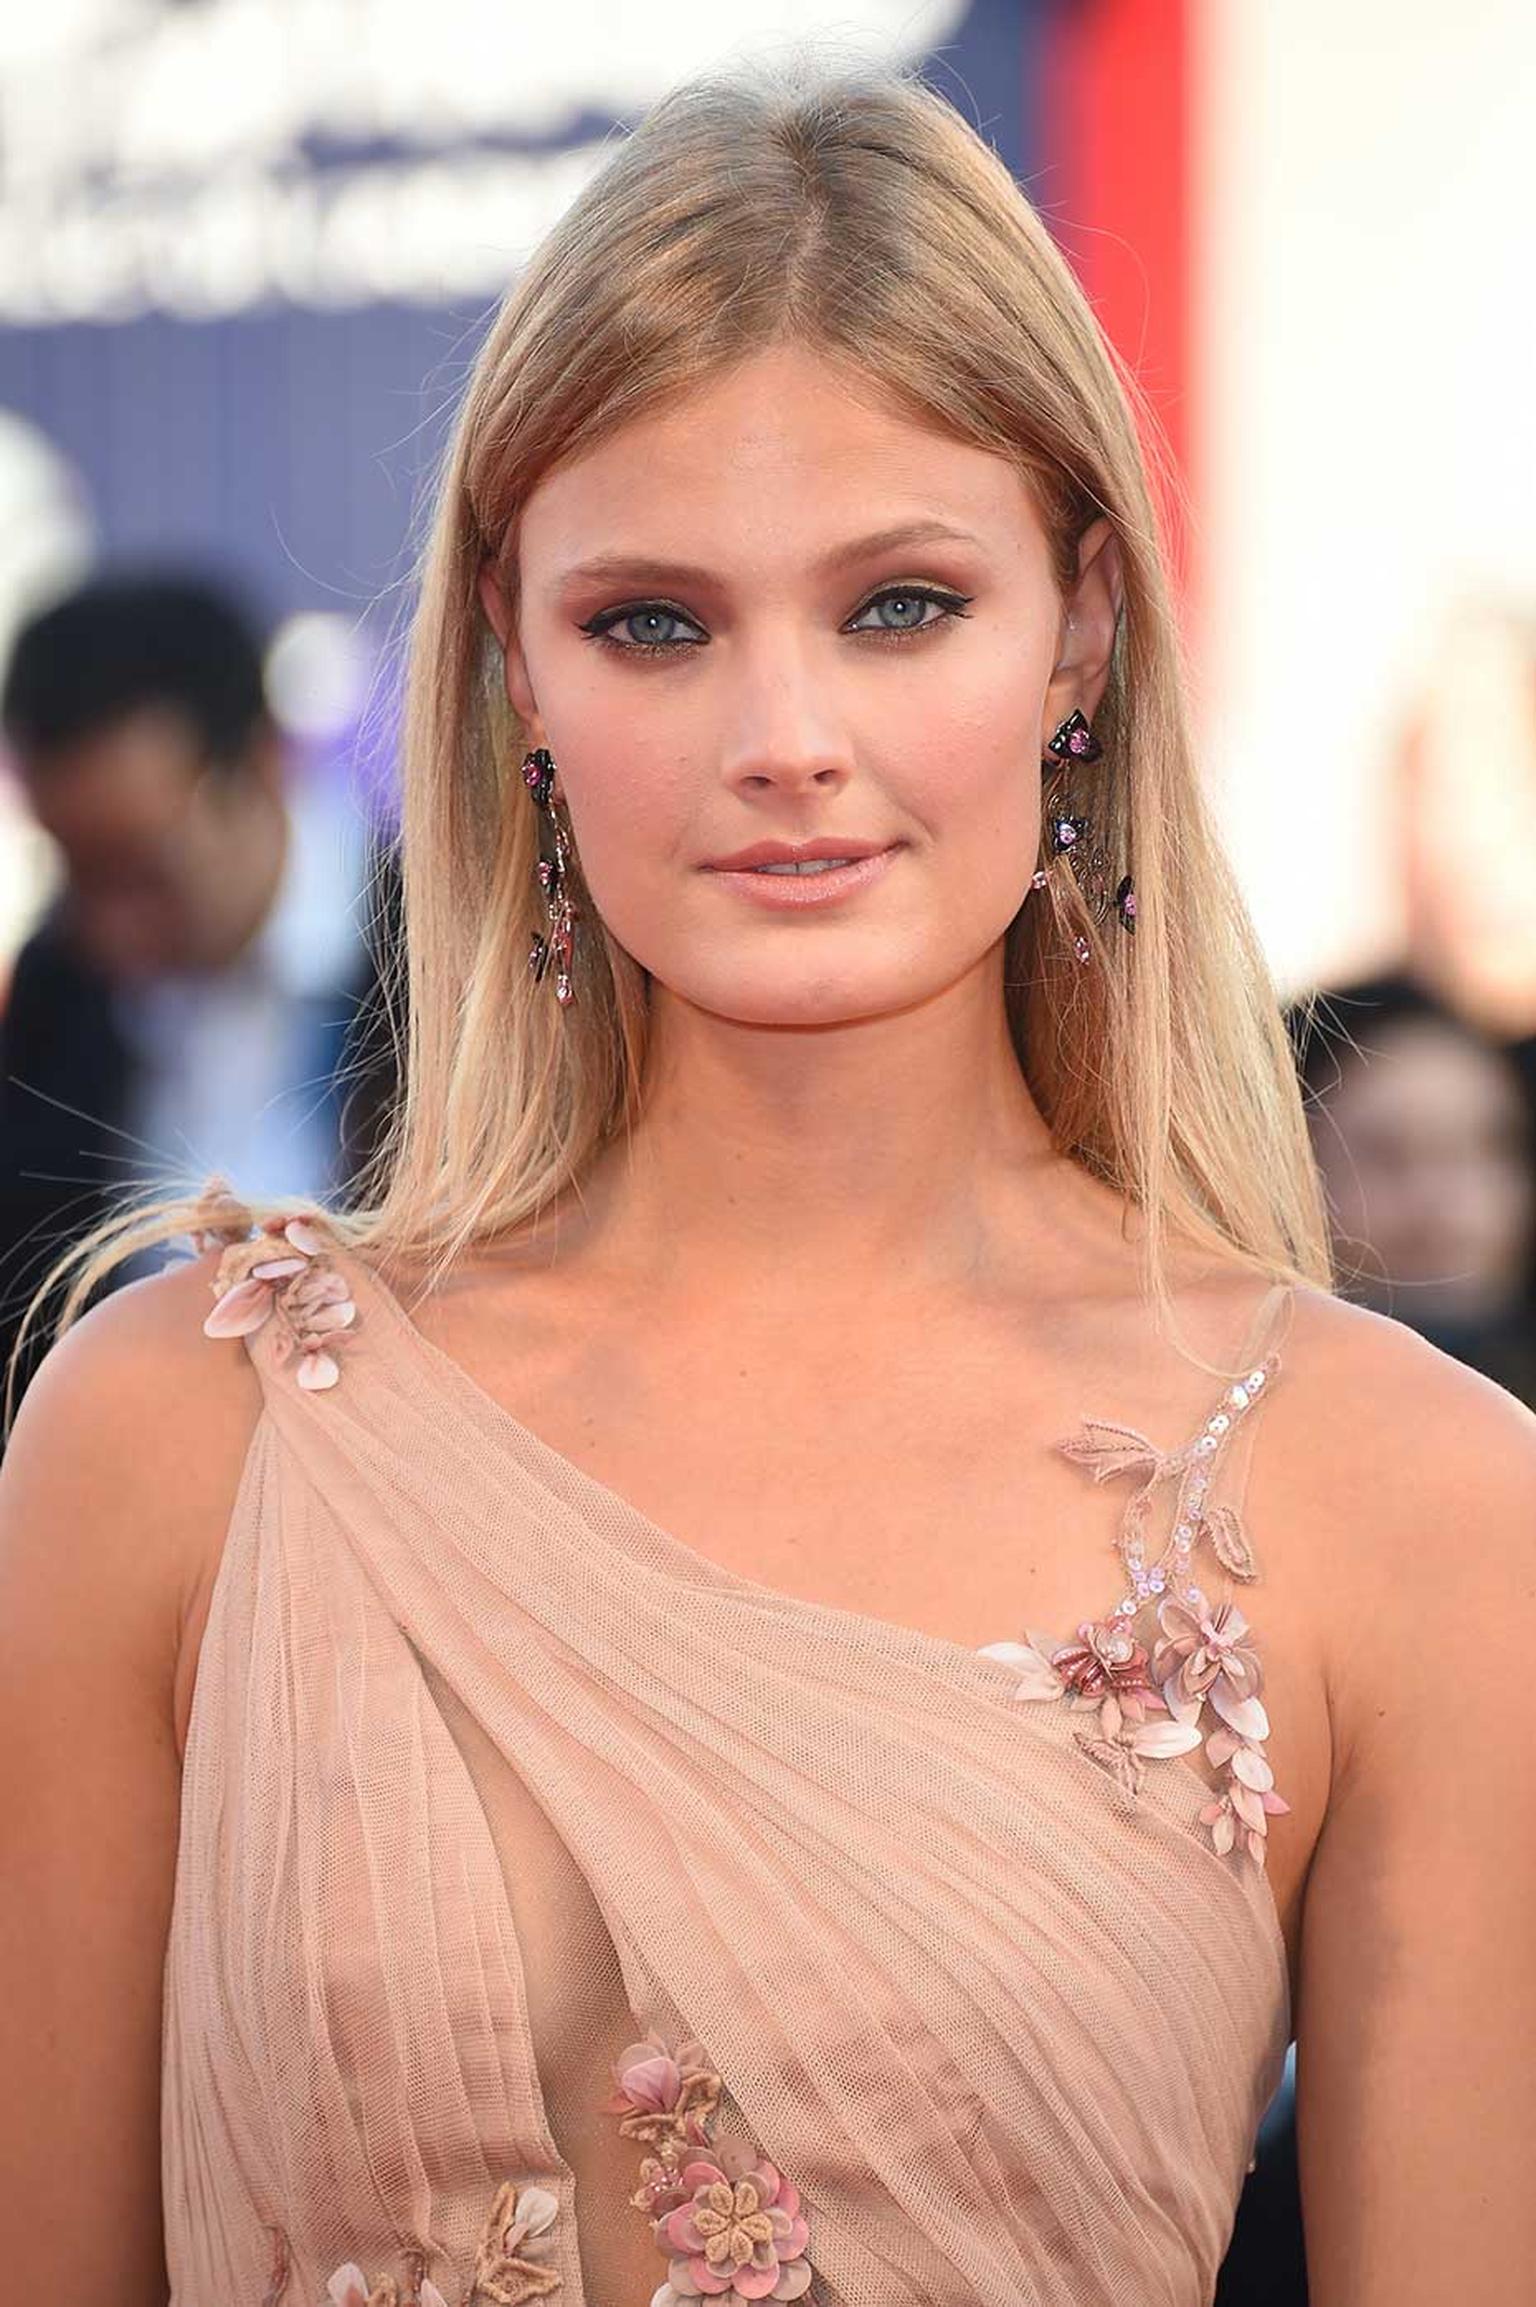 French model Constance Jablonski walked the red carpet at the Venice Film Festival 2014 in floral Chopard earrings set with onyx, heart-shaped pink sapphires, marquise-cut spinels and black brilliant-cut diamonds.